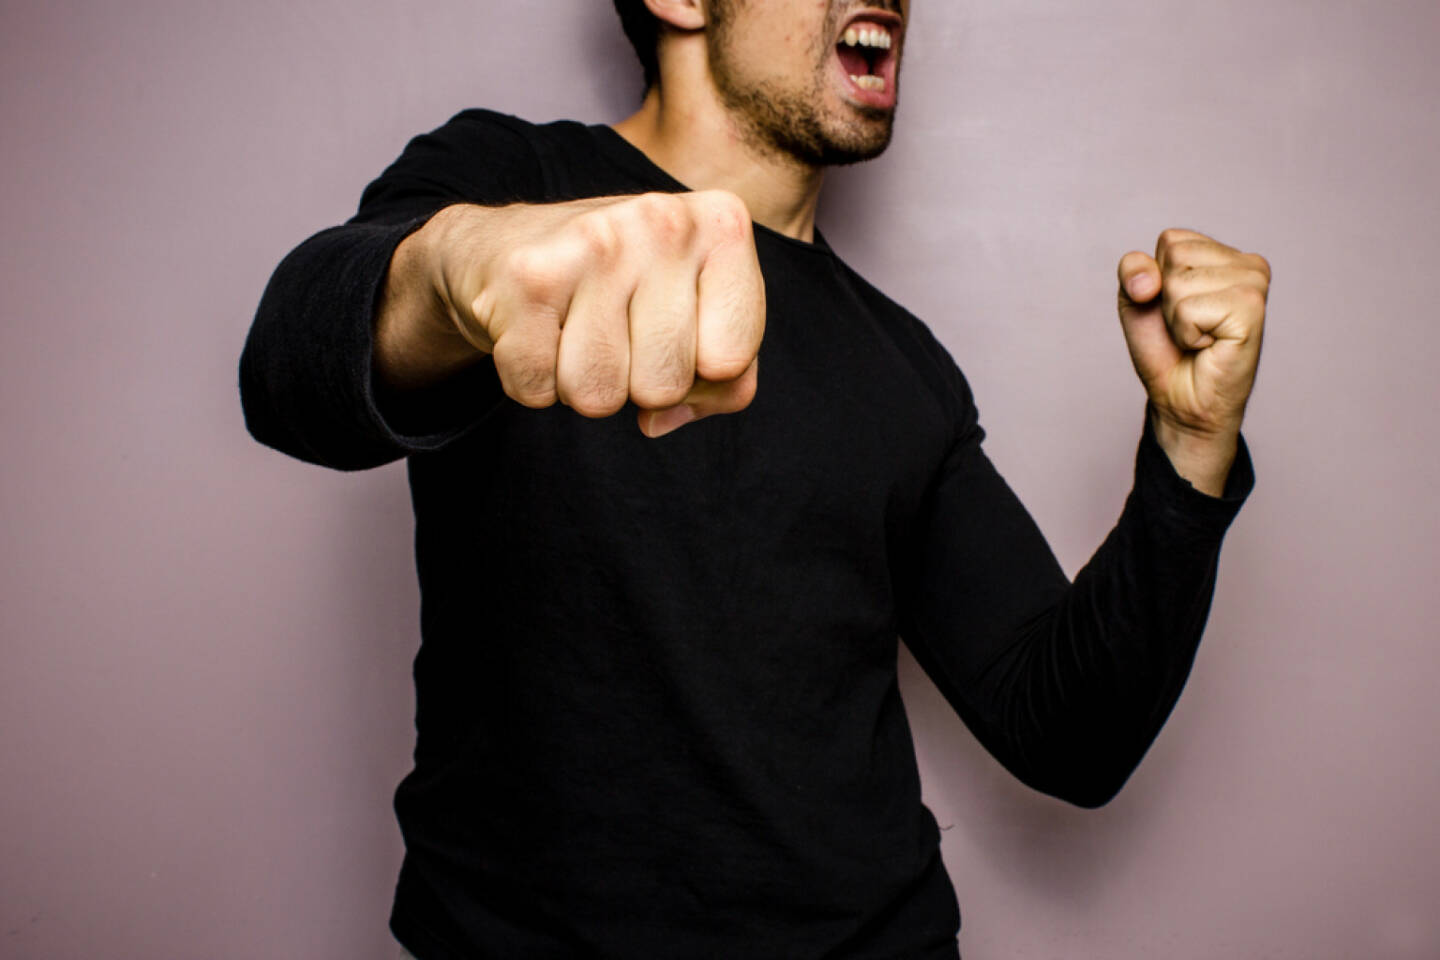 Aggression, Kampfgeist, Wut, Faust, geballte Faust, Schlag, http://www.shutterstock.com/de/pic-151024484/stock-photo-angry-man-throwing-a-punch.html 